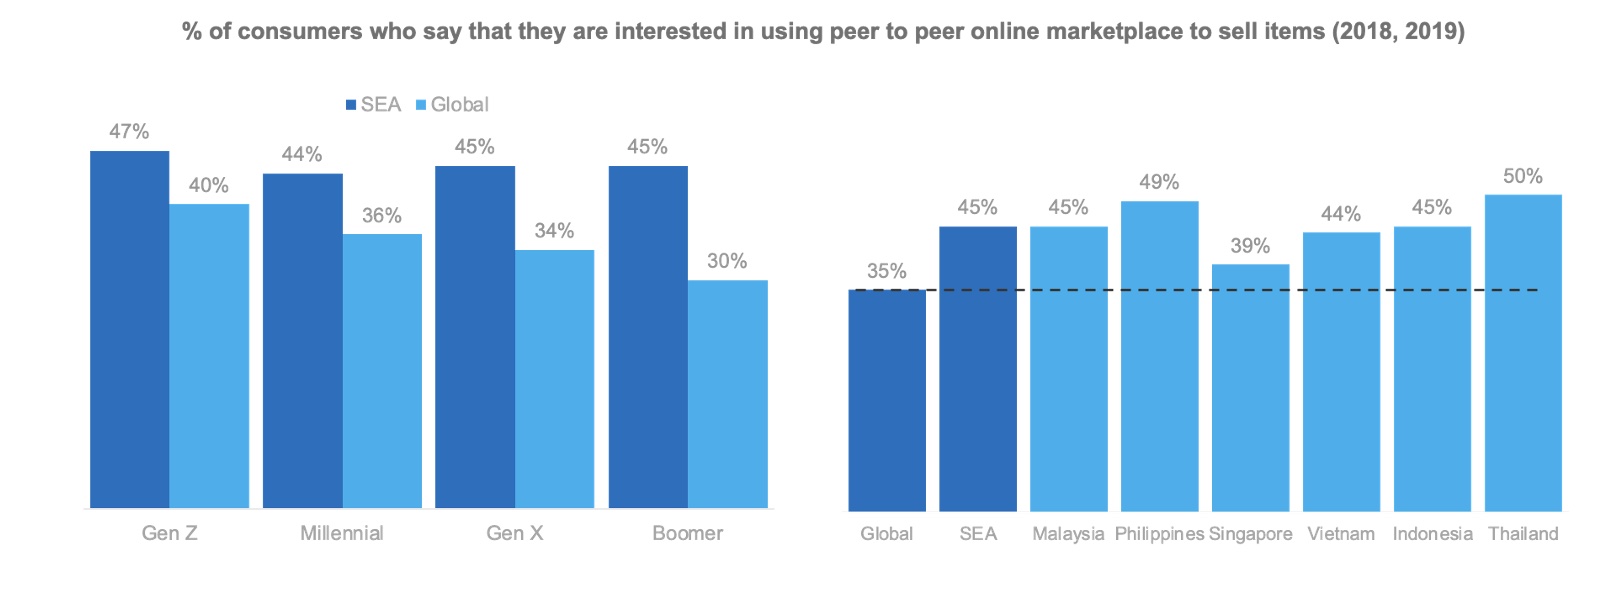 People in Southeast Asia show a higher preference for P2P online marketplaces than other regions